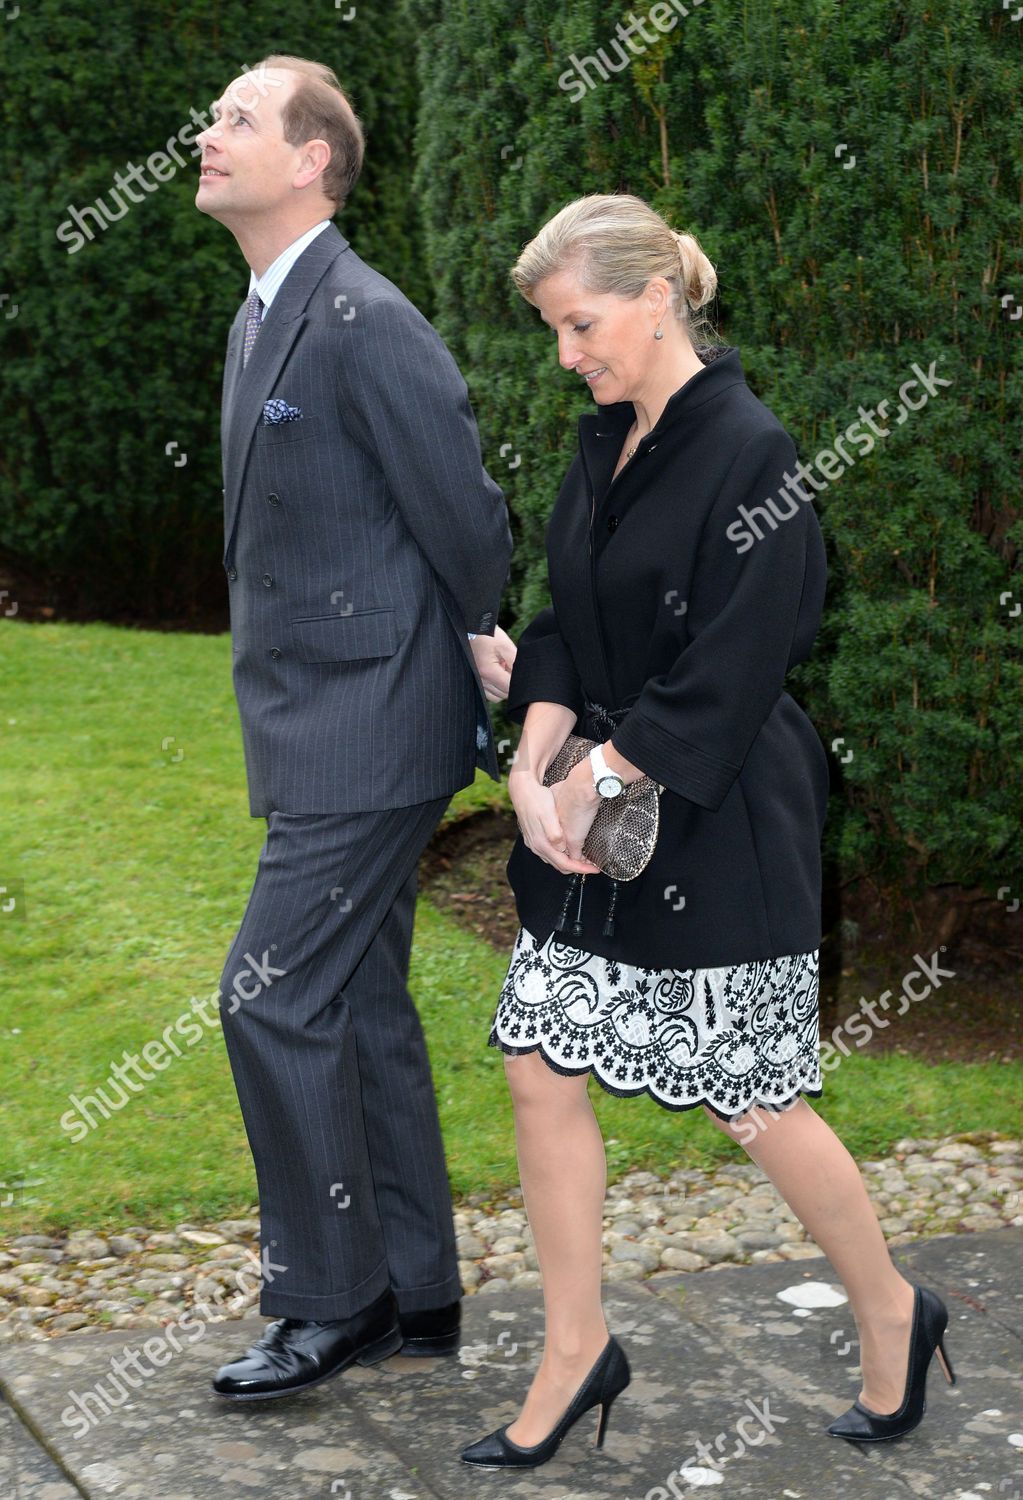 prince-edward-and-sophie-countess-of-wessex-visit-the-isle-of-wight-britain-shutterstock-editorial-3676969b.jpg